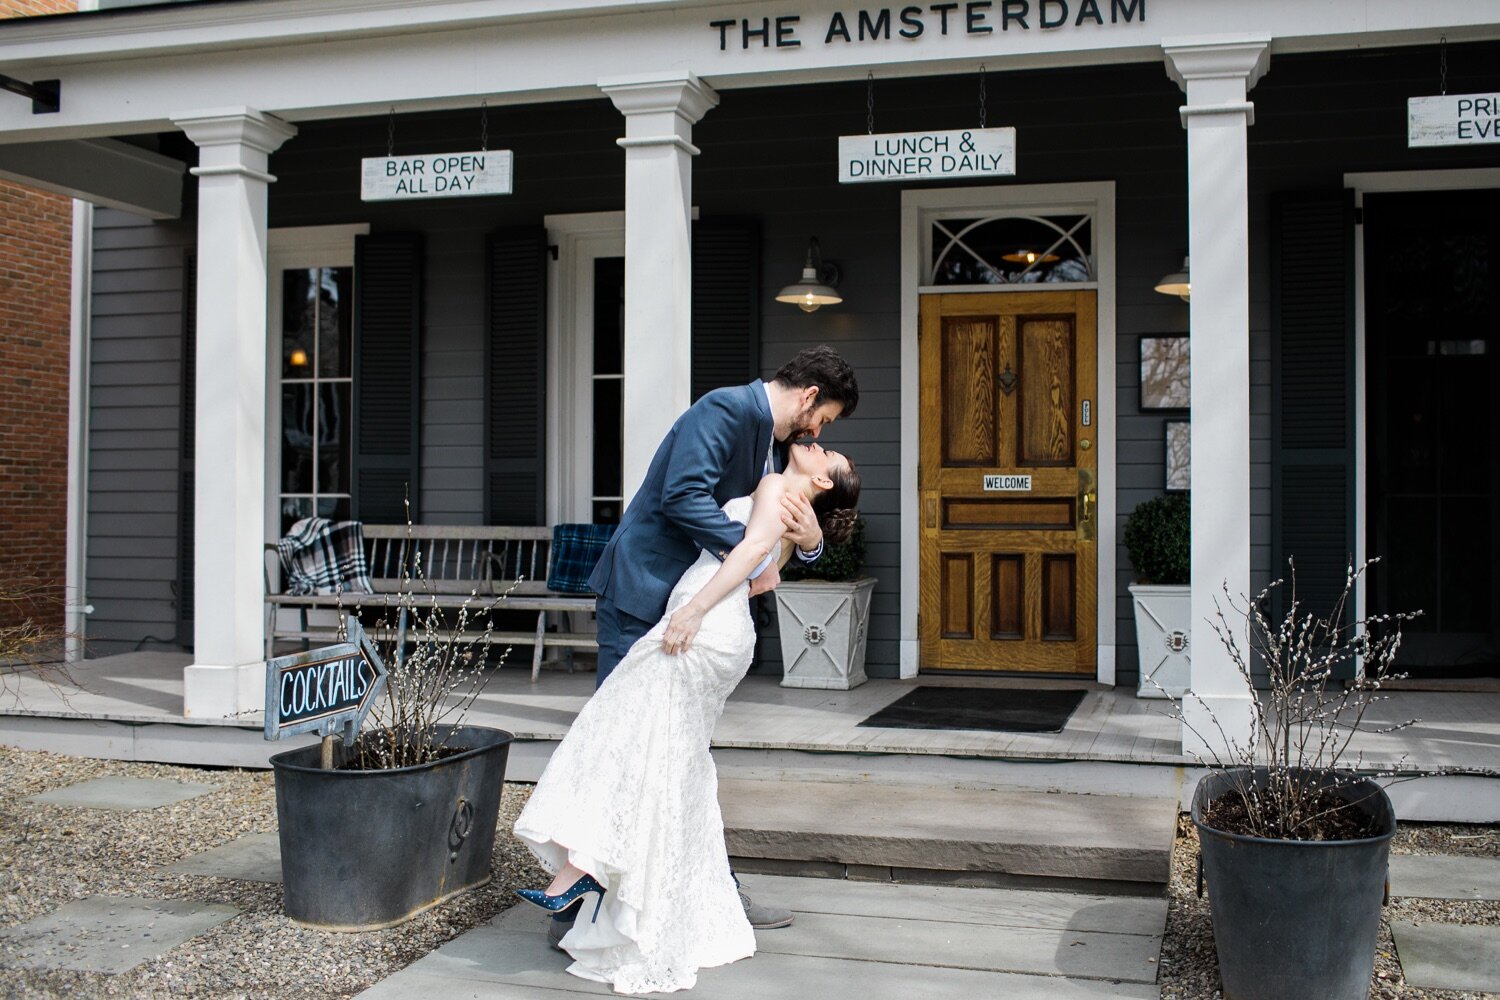 33_Bride and groom photos at the Amsterdam in Rhinebeck NY.jpg